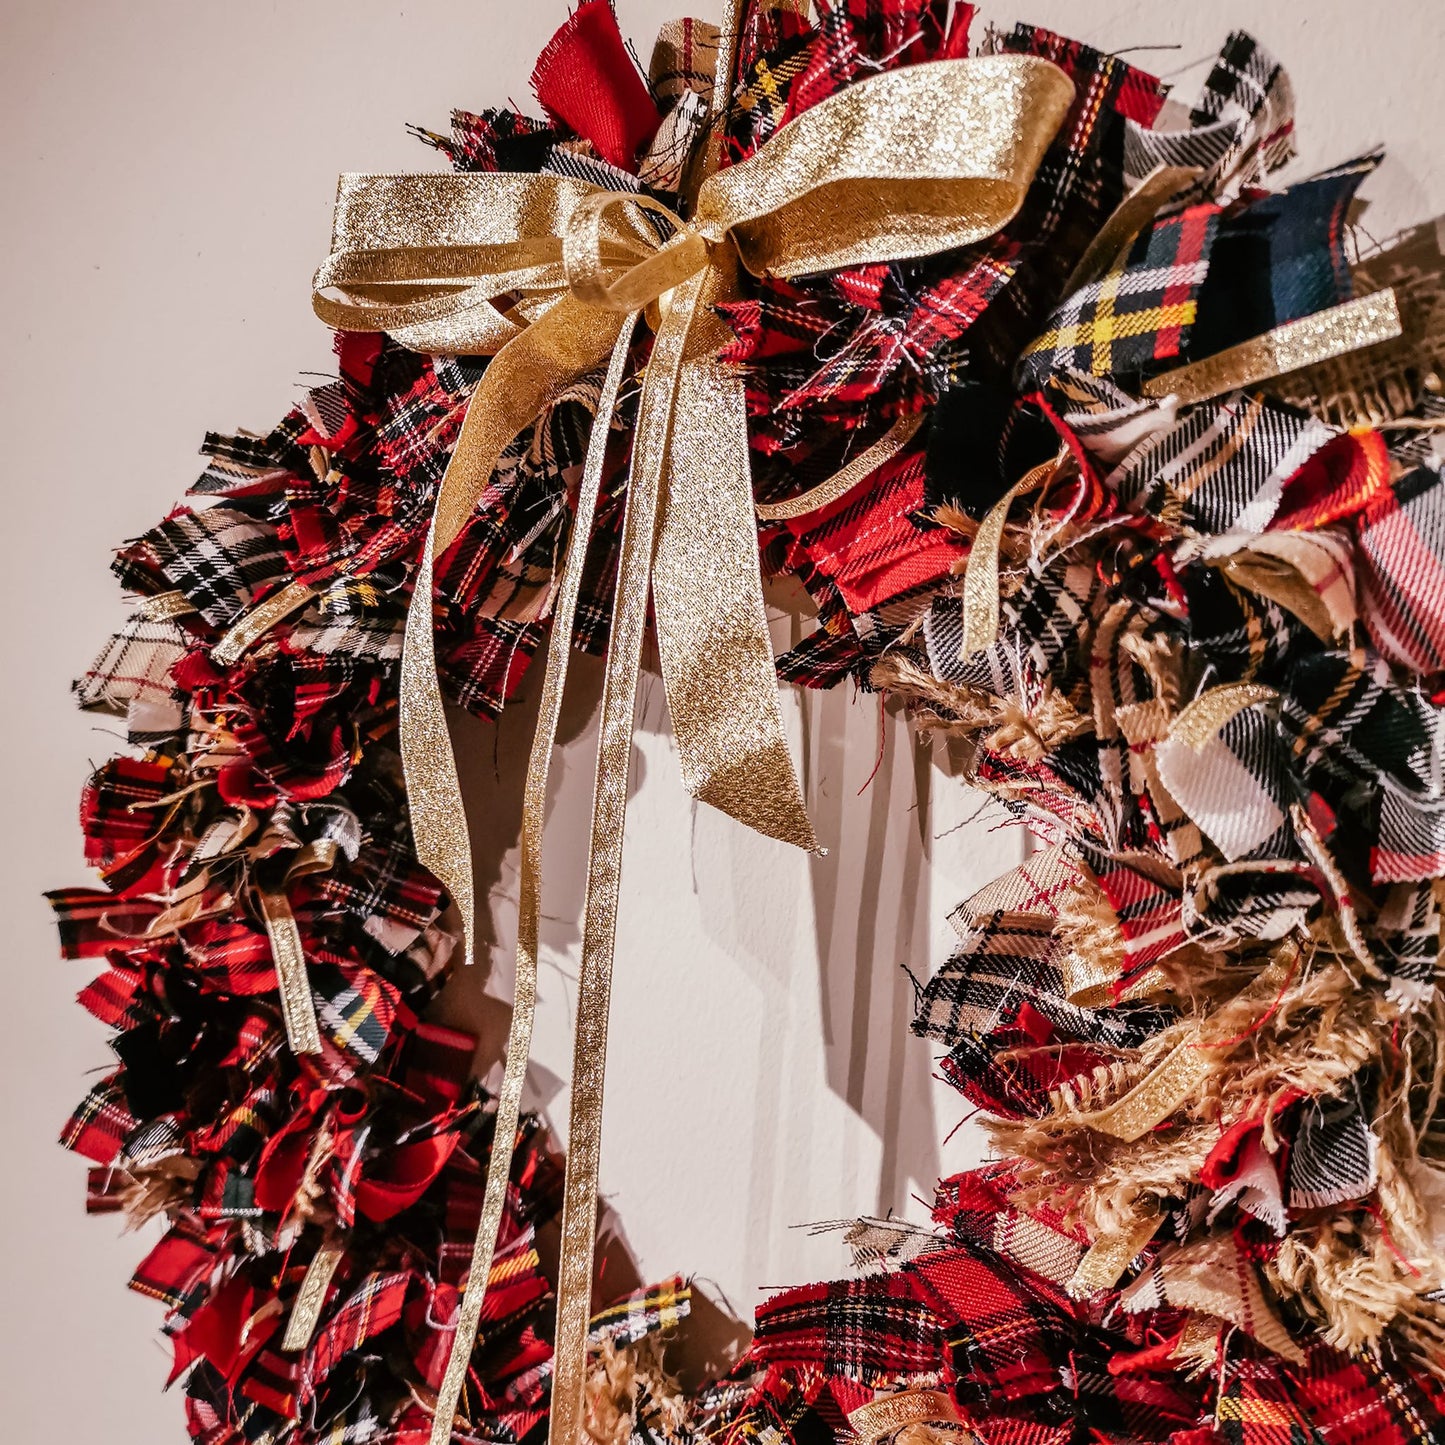 Red Gold Tartan and Hessian Wreath - Handmade by F&B in Yorkshire